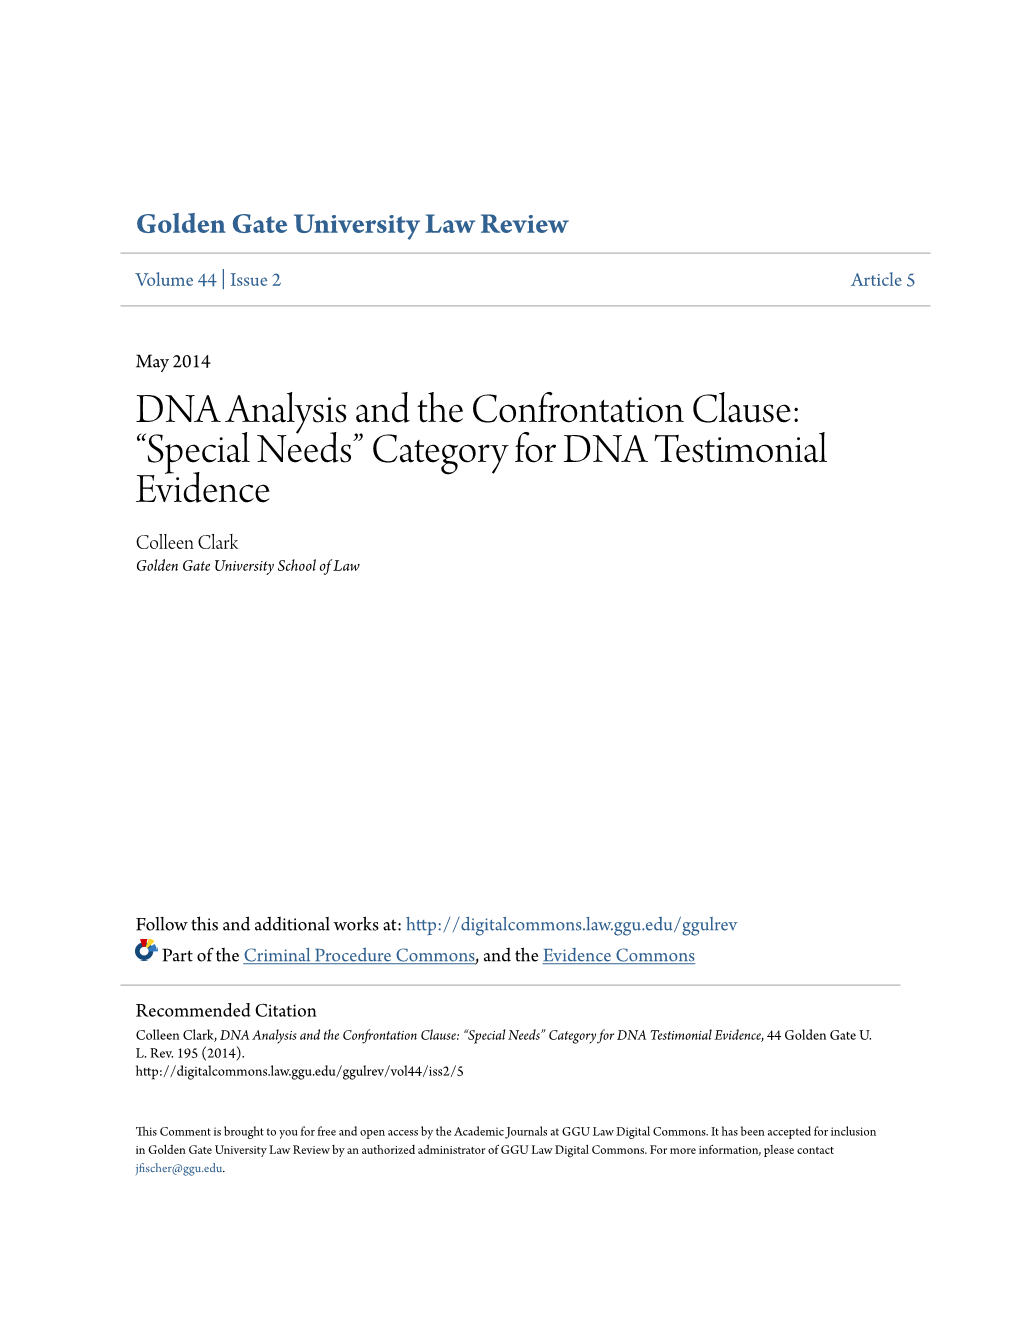 DNA Analysis and the Confrontation Clause: “Special Needs” Category for DNA Testimonial Evidence Colleen Clark Golden Gate University School of Law